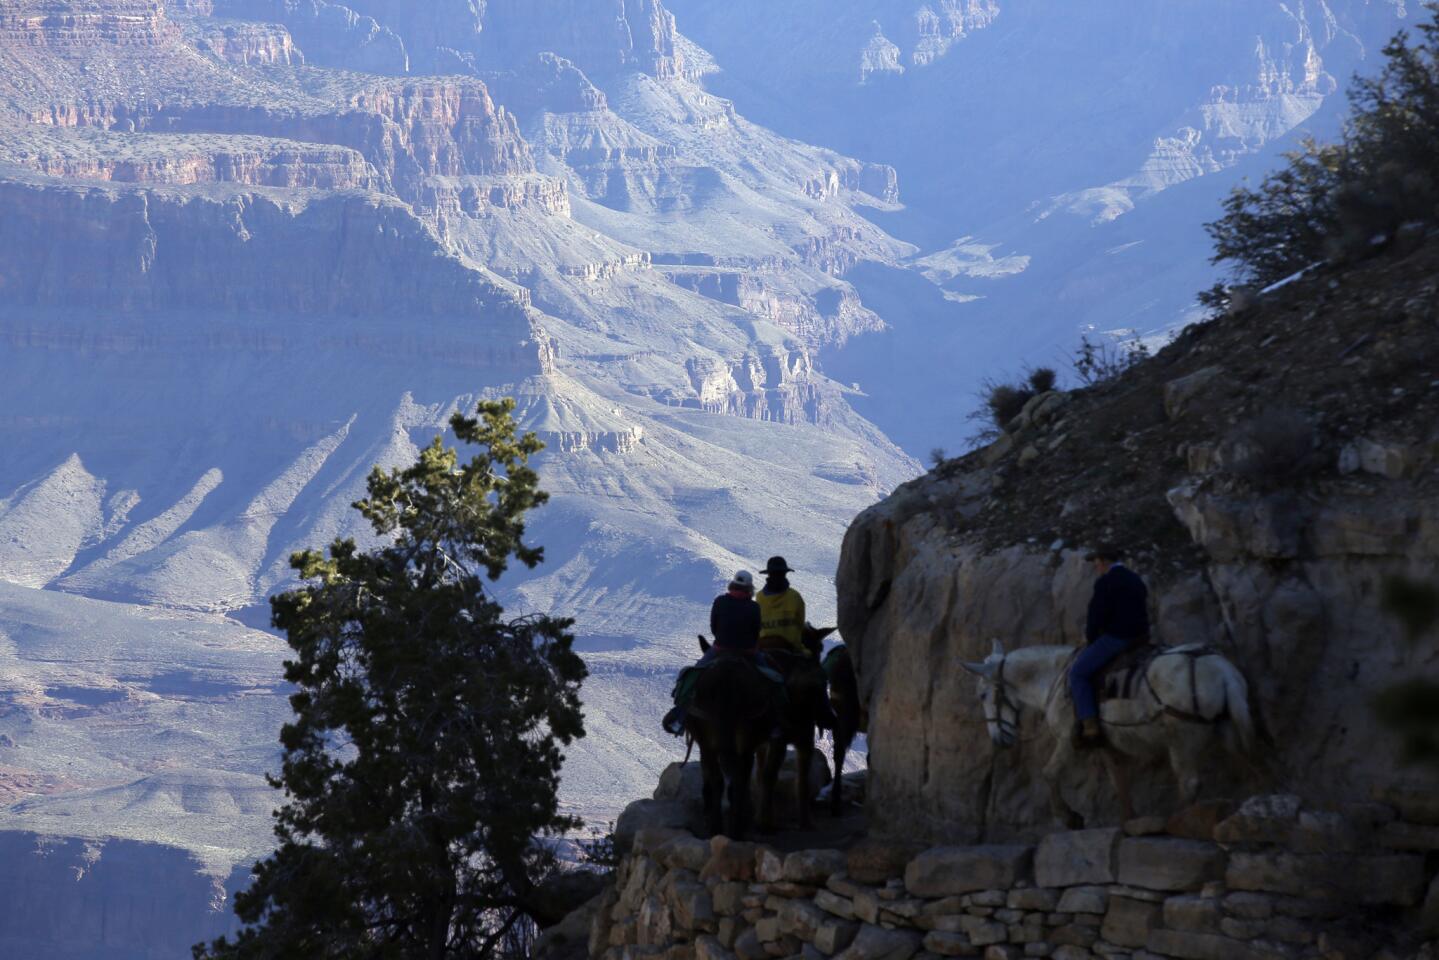 Mule riders on their journey down the Bright Angel Trail.